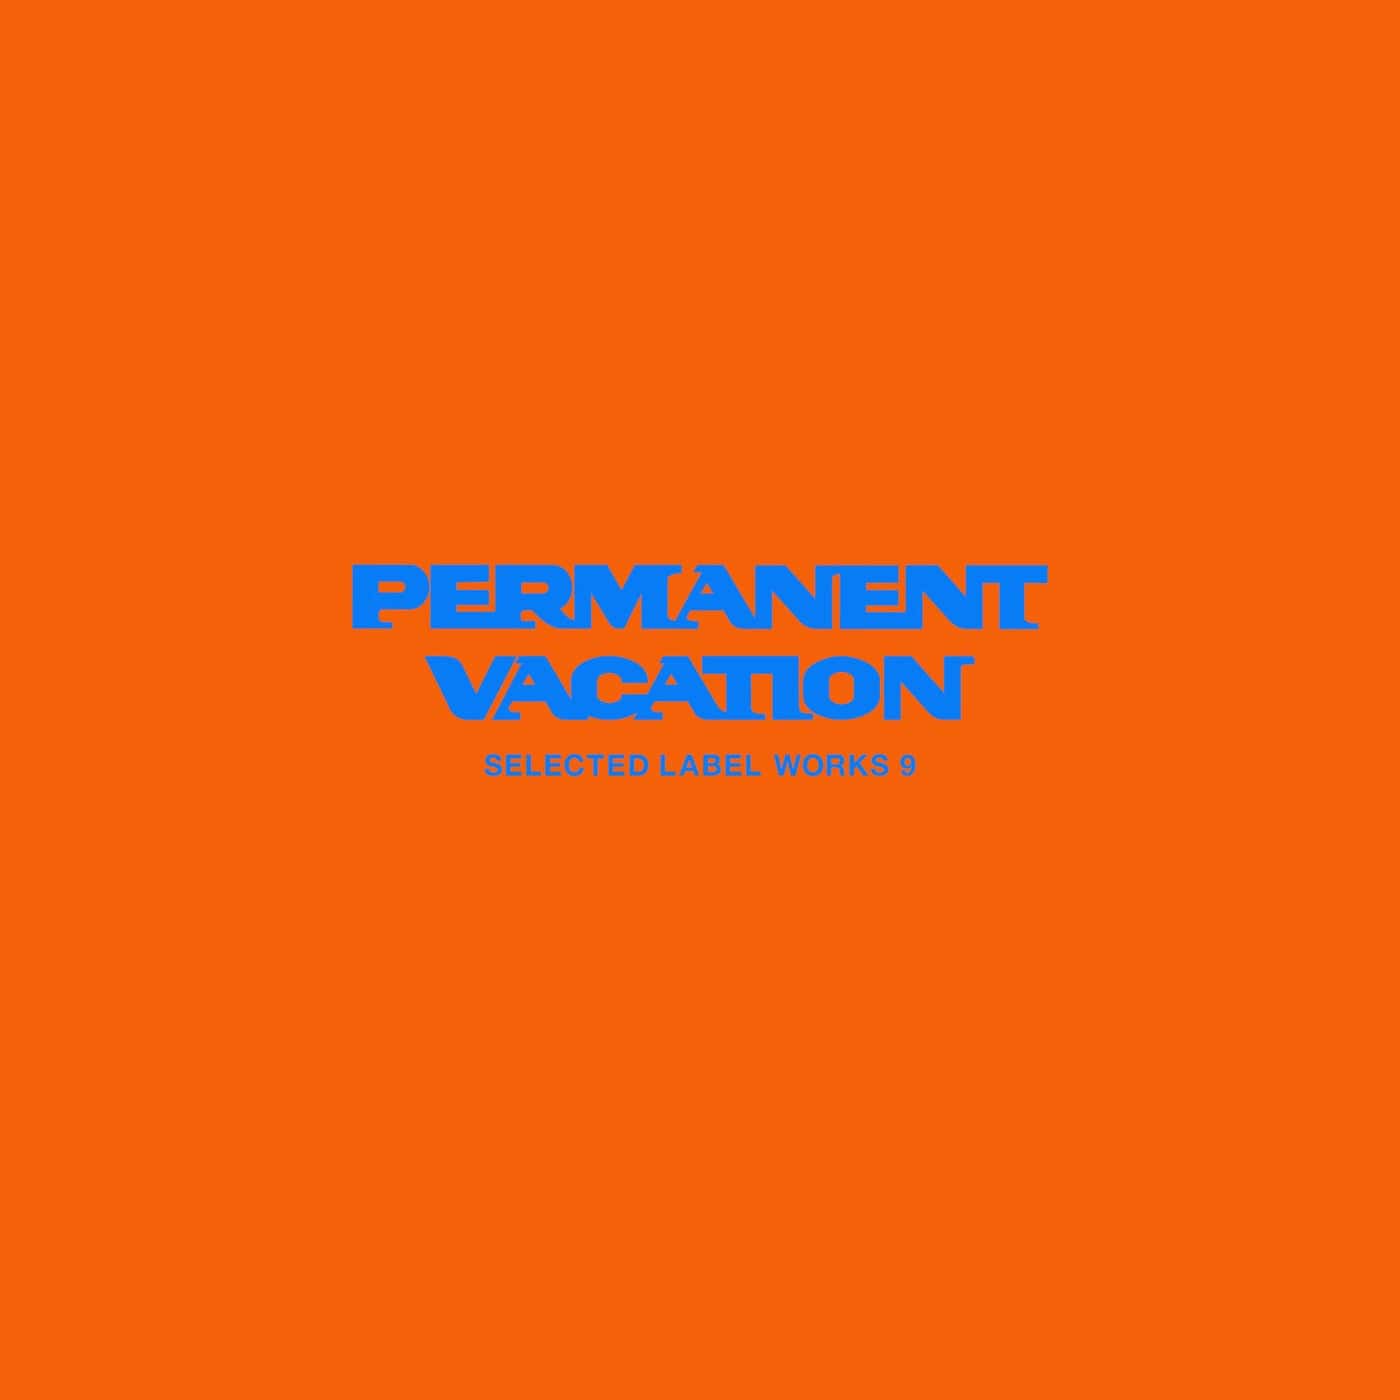 Download VA - Permanent Vacation Selected Label Works 9 on Electrobuzz